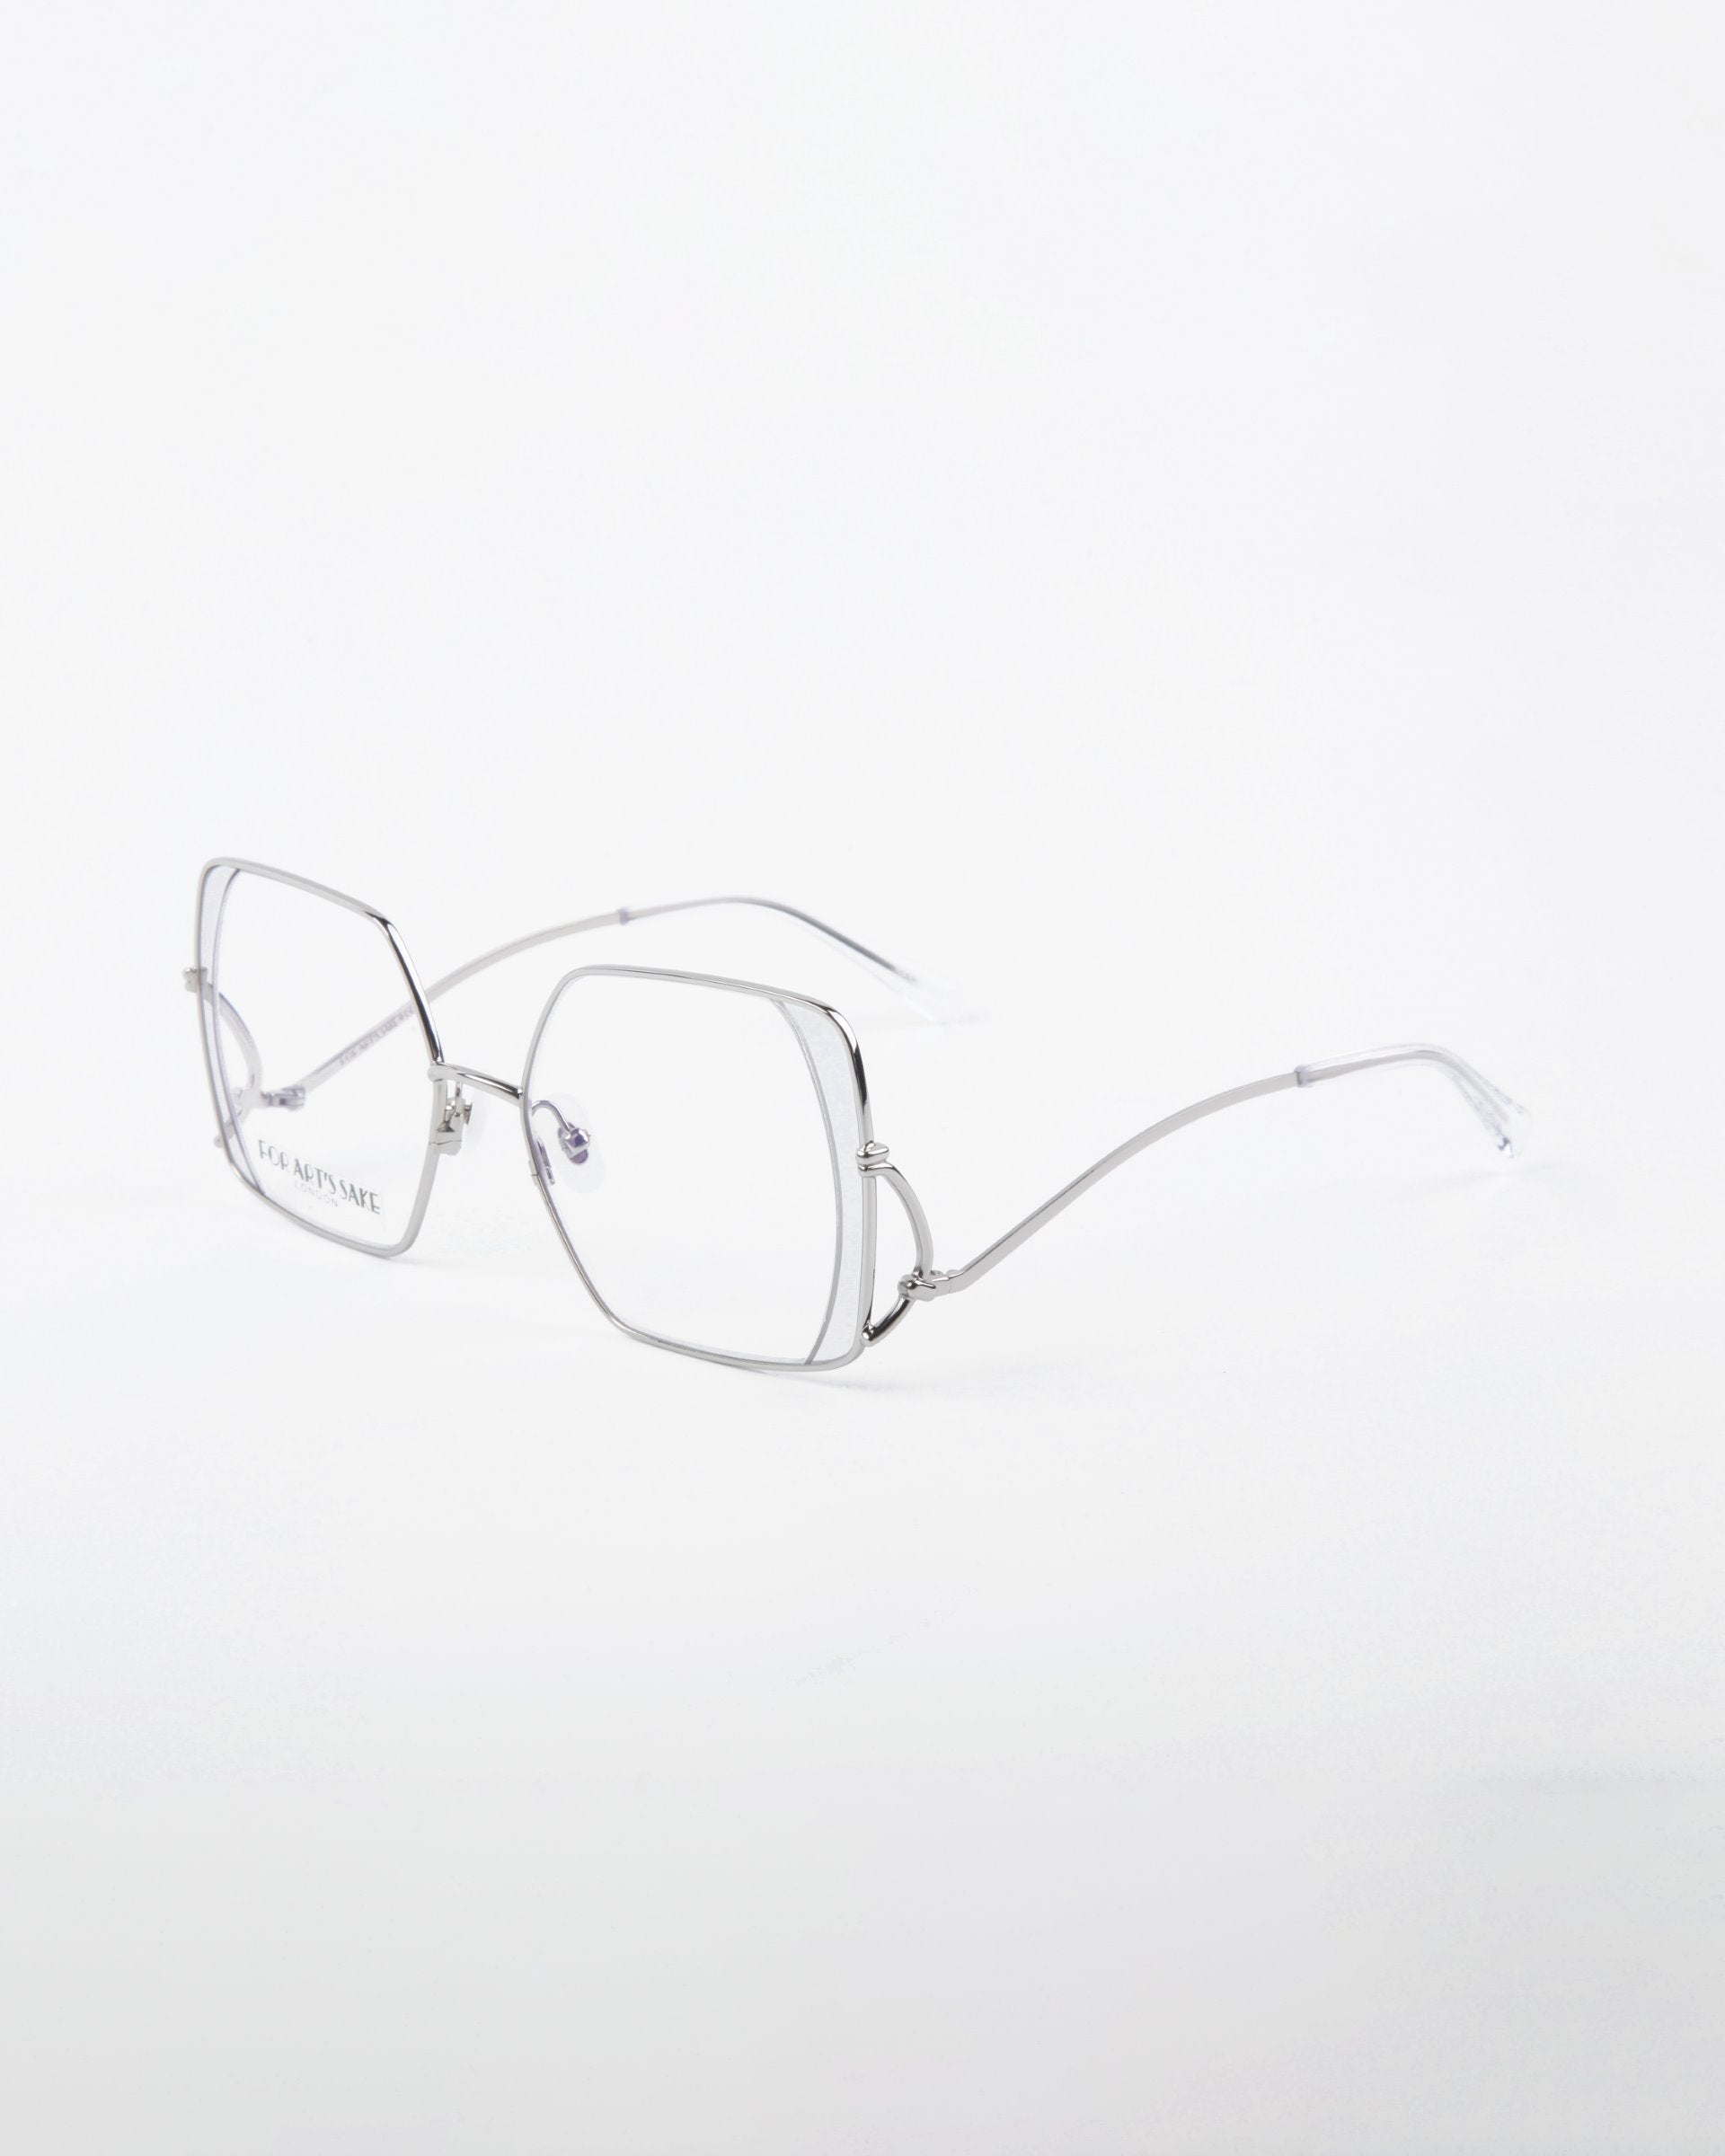 A pair of Candy eyeglasses by For Art's Sake® with silver wire frames. The lenses are slightly oversized and hexagonal, featuring a blue light filter for added eye protection. Thin stainless steel arms extend from the lenses. The design is sleek and modern, set against a plain white background.